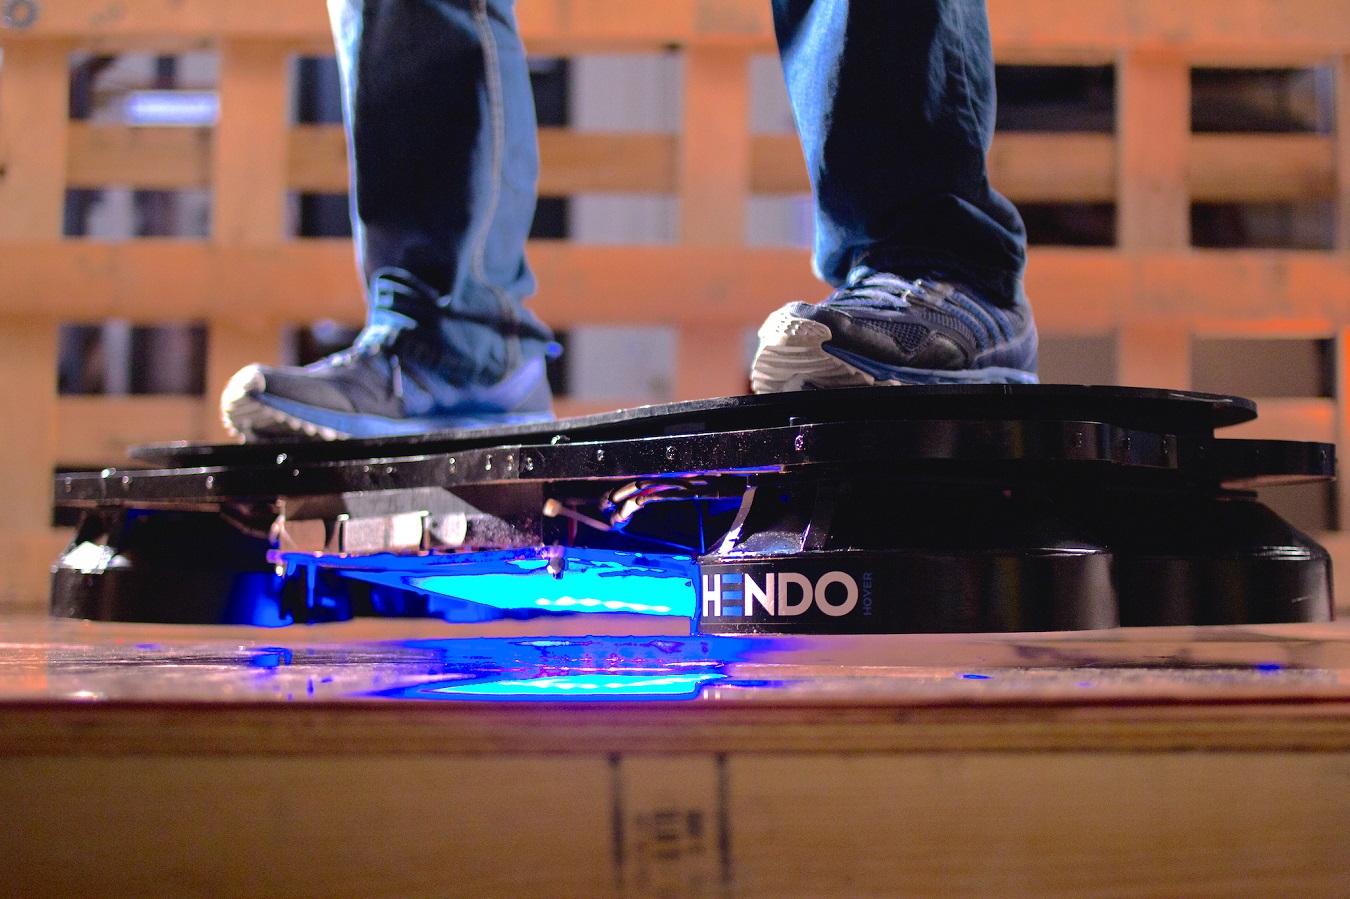 The hendo 2. 0 hoverboard: the future has arrived